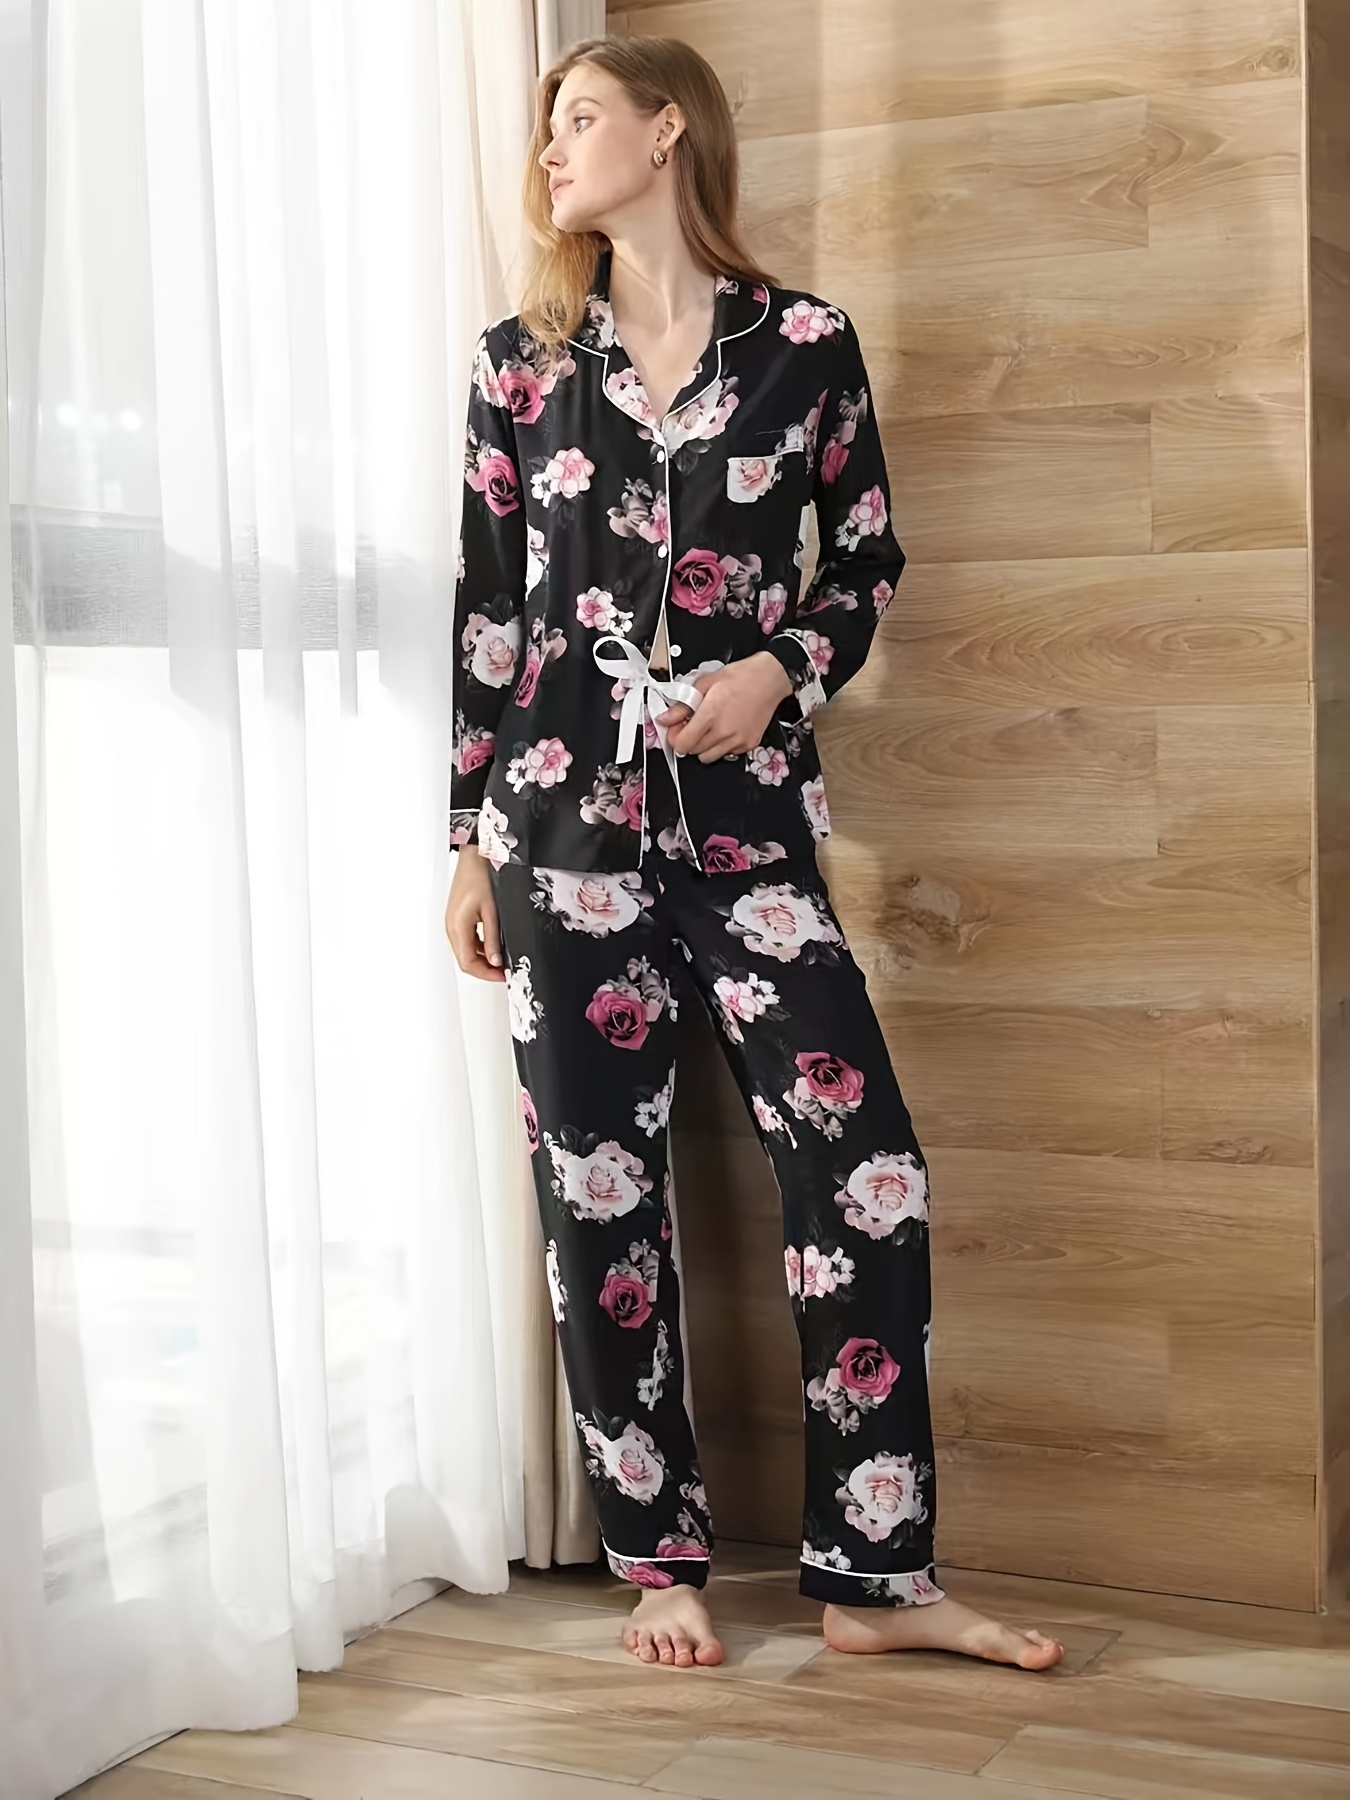 Quince Women's Button Up Pajama Top